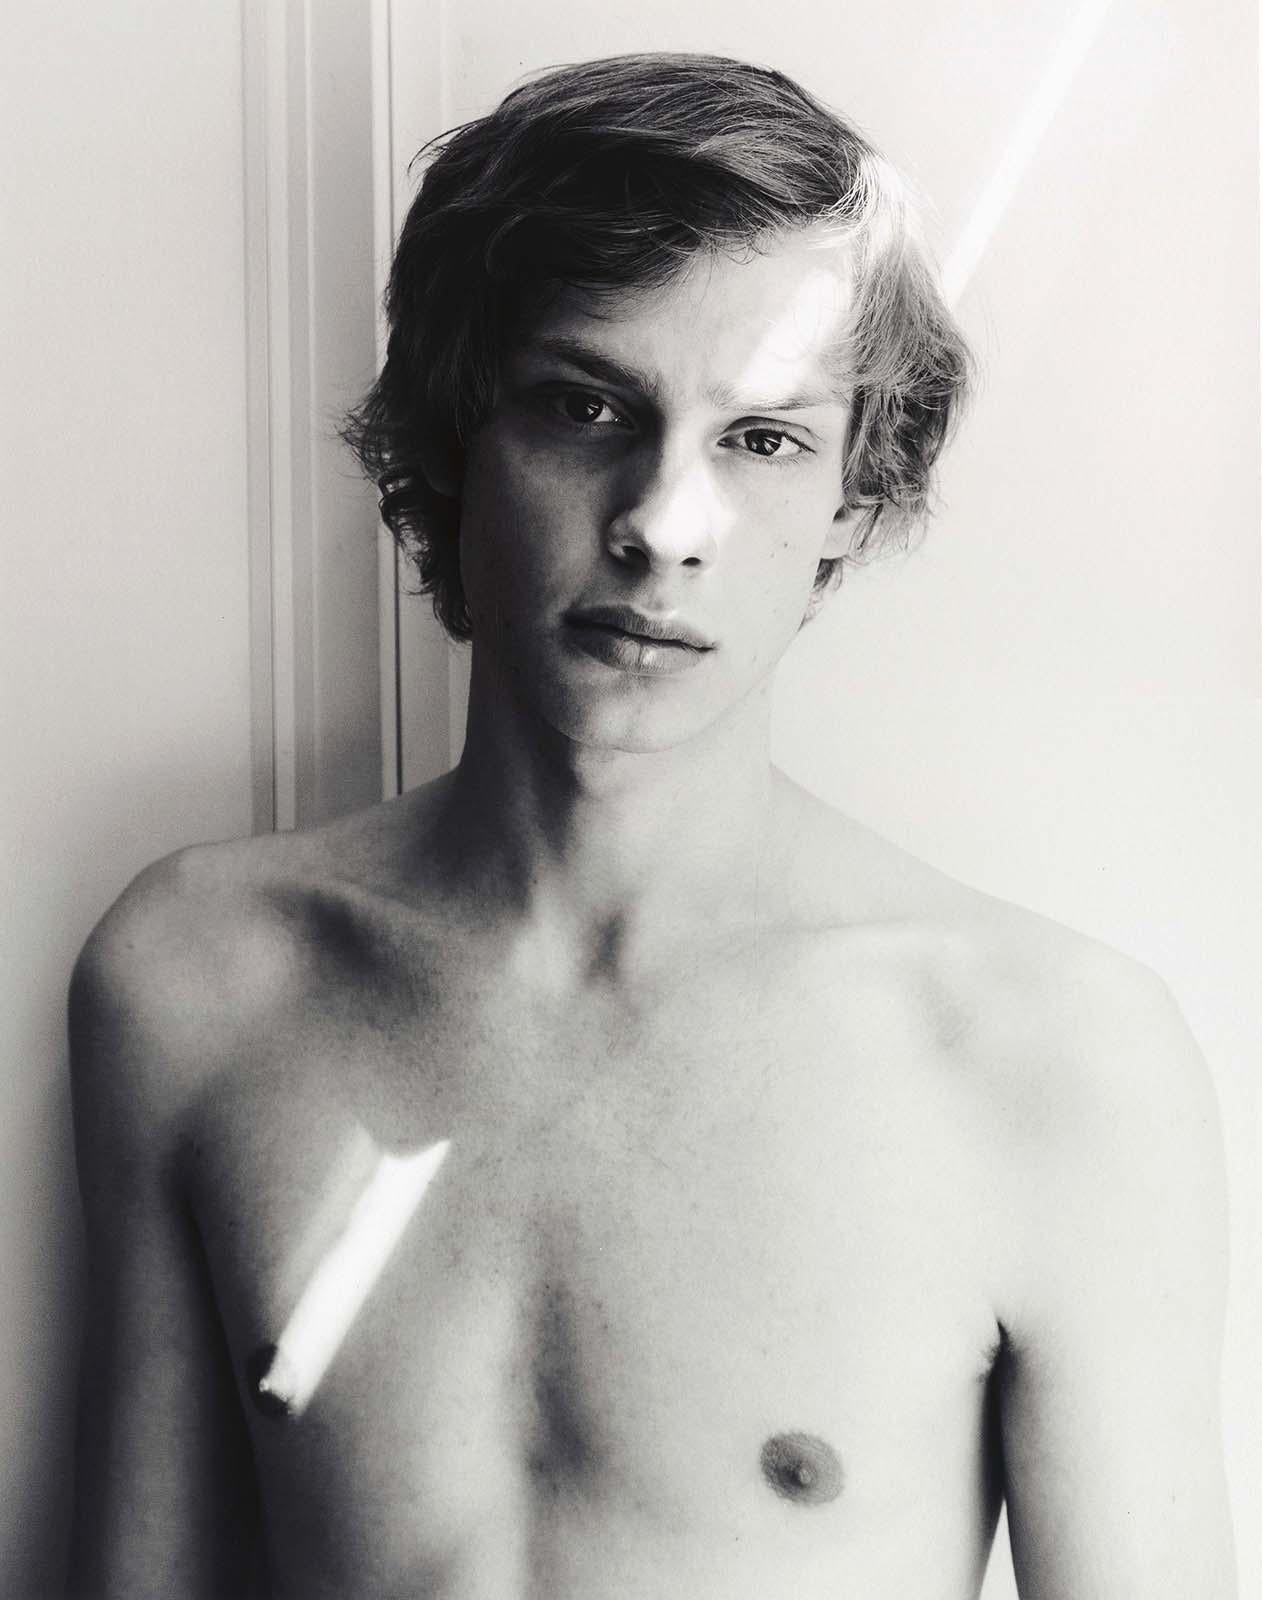 Figurative Photograph Alex Avgud - Jay and a Ray of Sun (the sun slants across young man's body from eye to nipple)